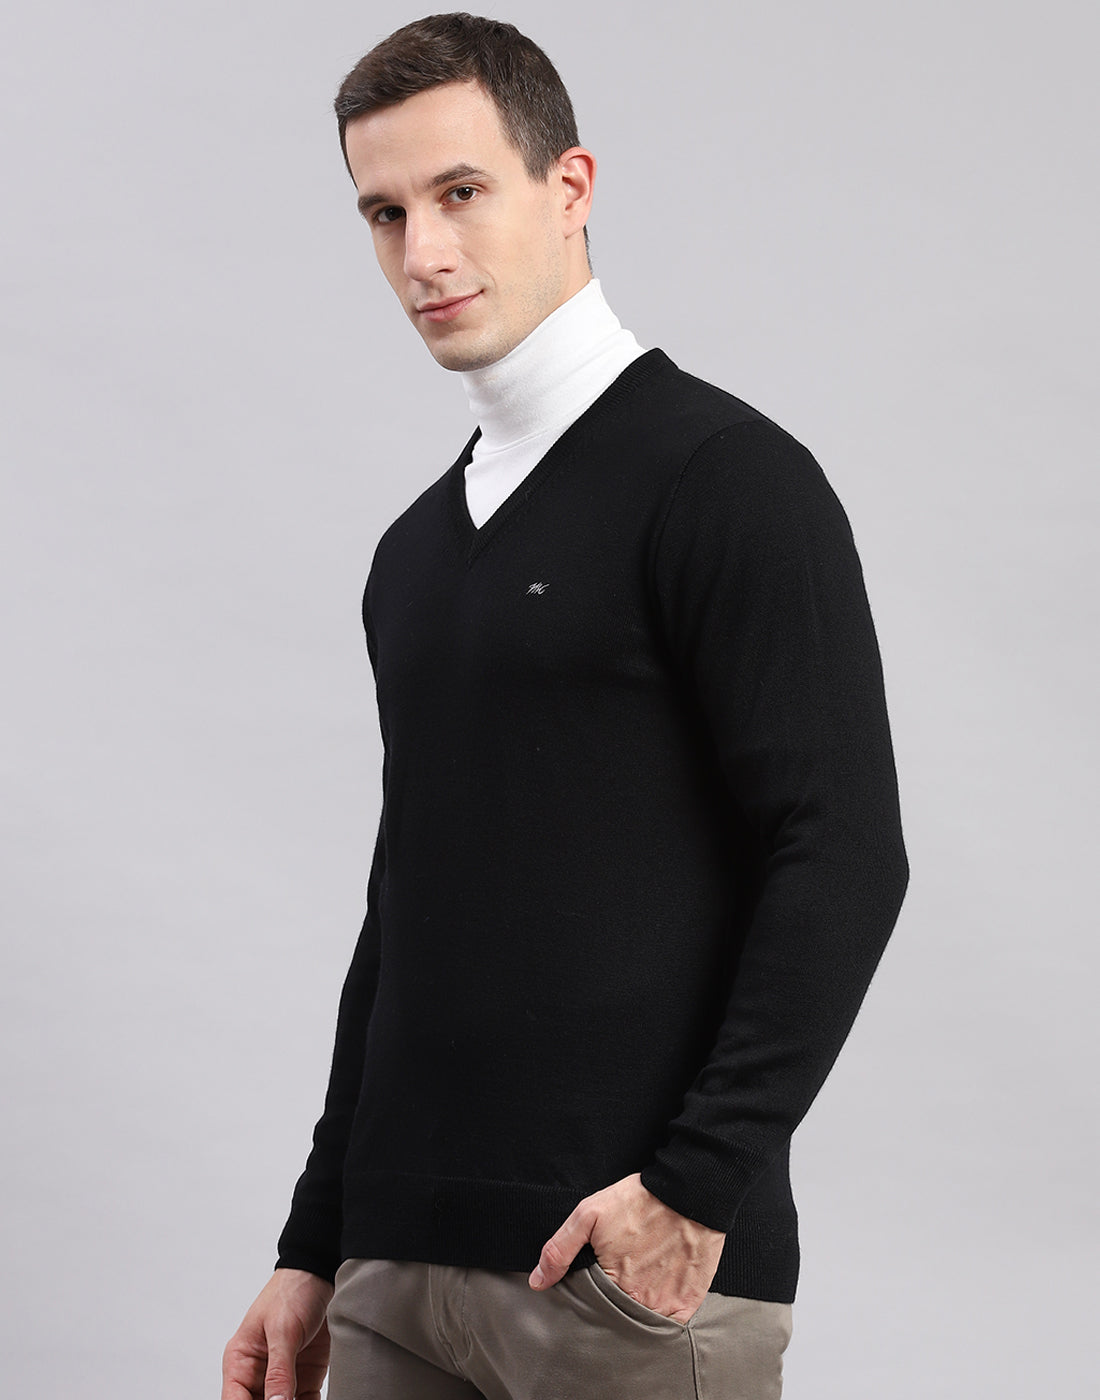 Men Black Solid V Neck Full Sleeve Sweaters/Pullovers